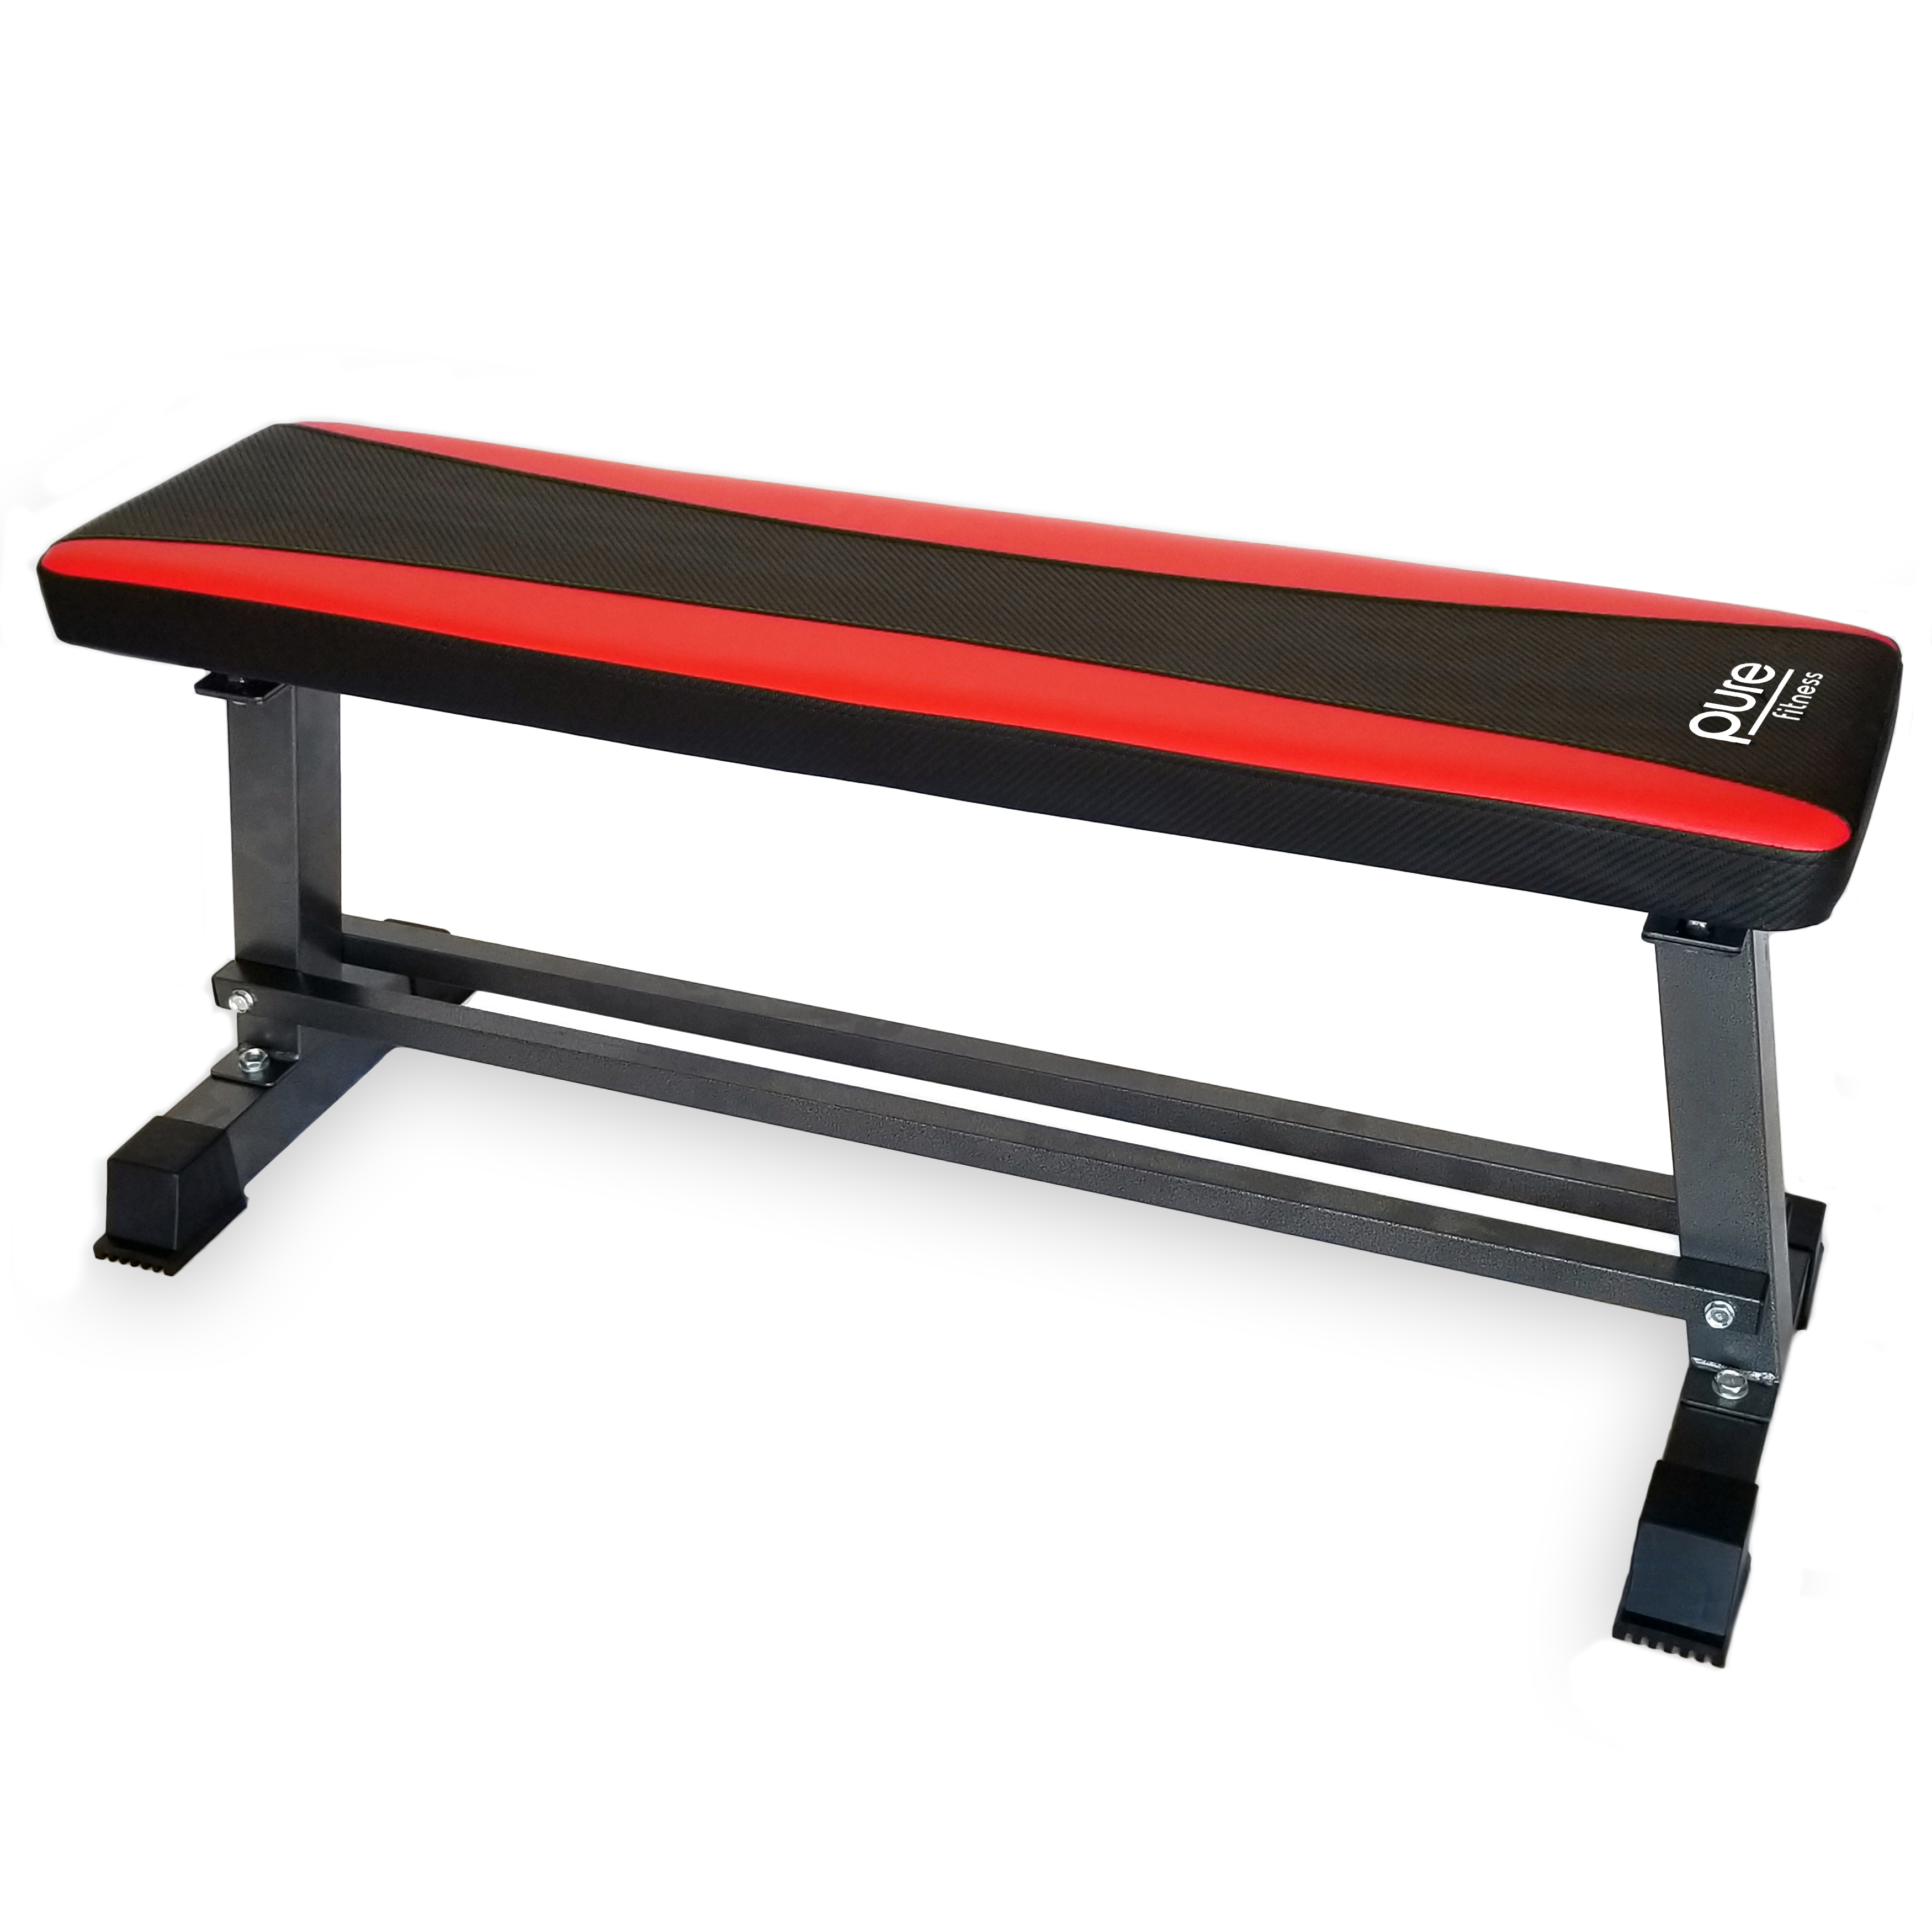 Pure Fitness Flat Bench with Dumbbell Rack, Weight Capacity 600lbs - image 1 of 6